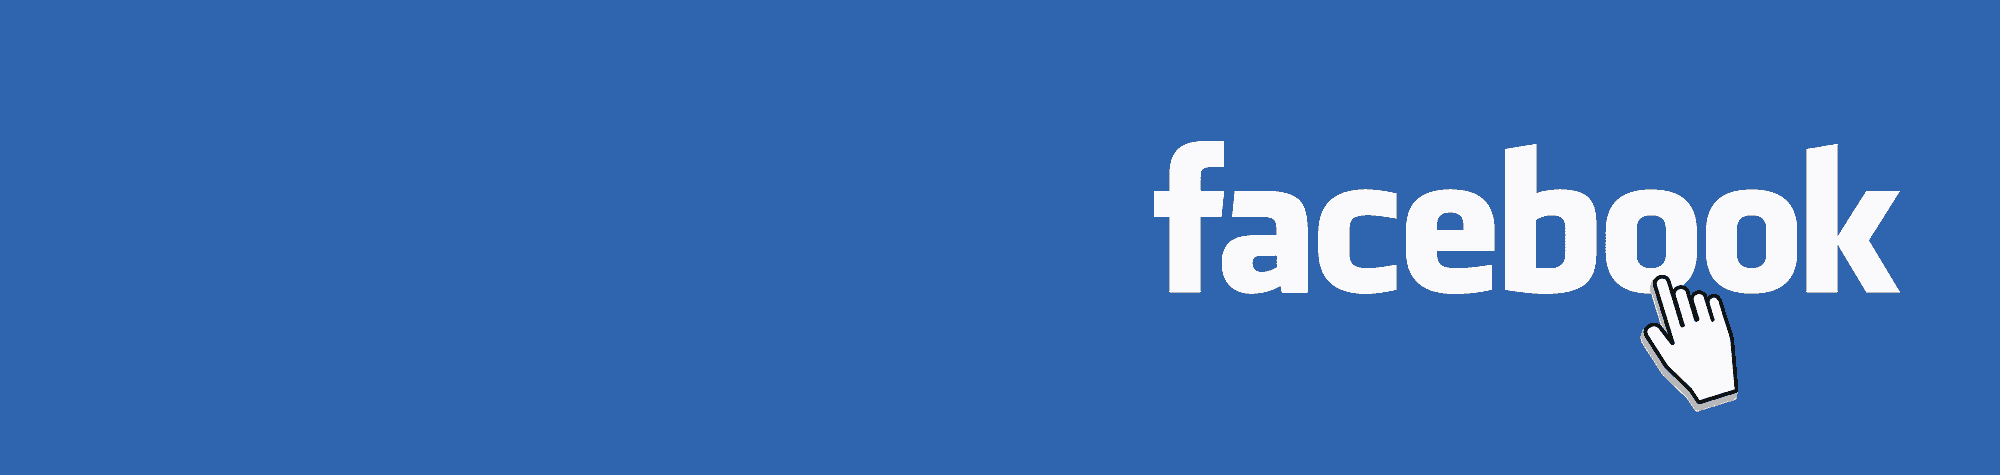 How to create a Facebook page for your business | Business tips